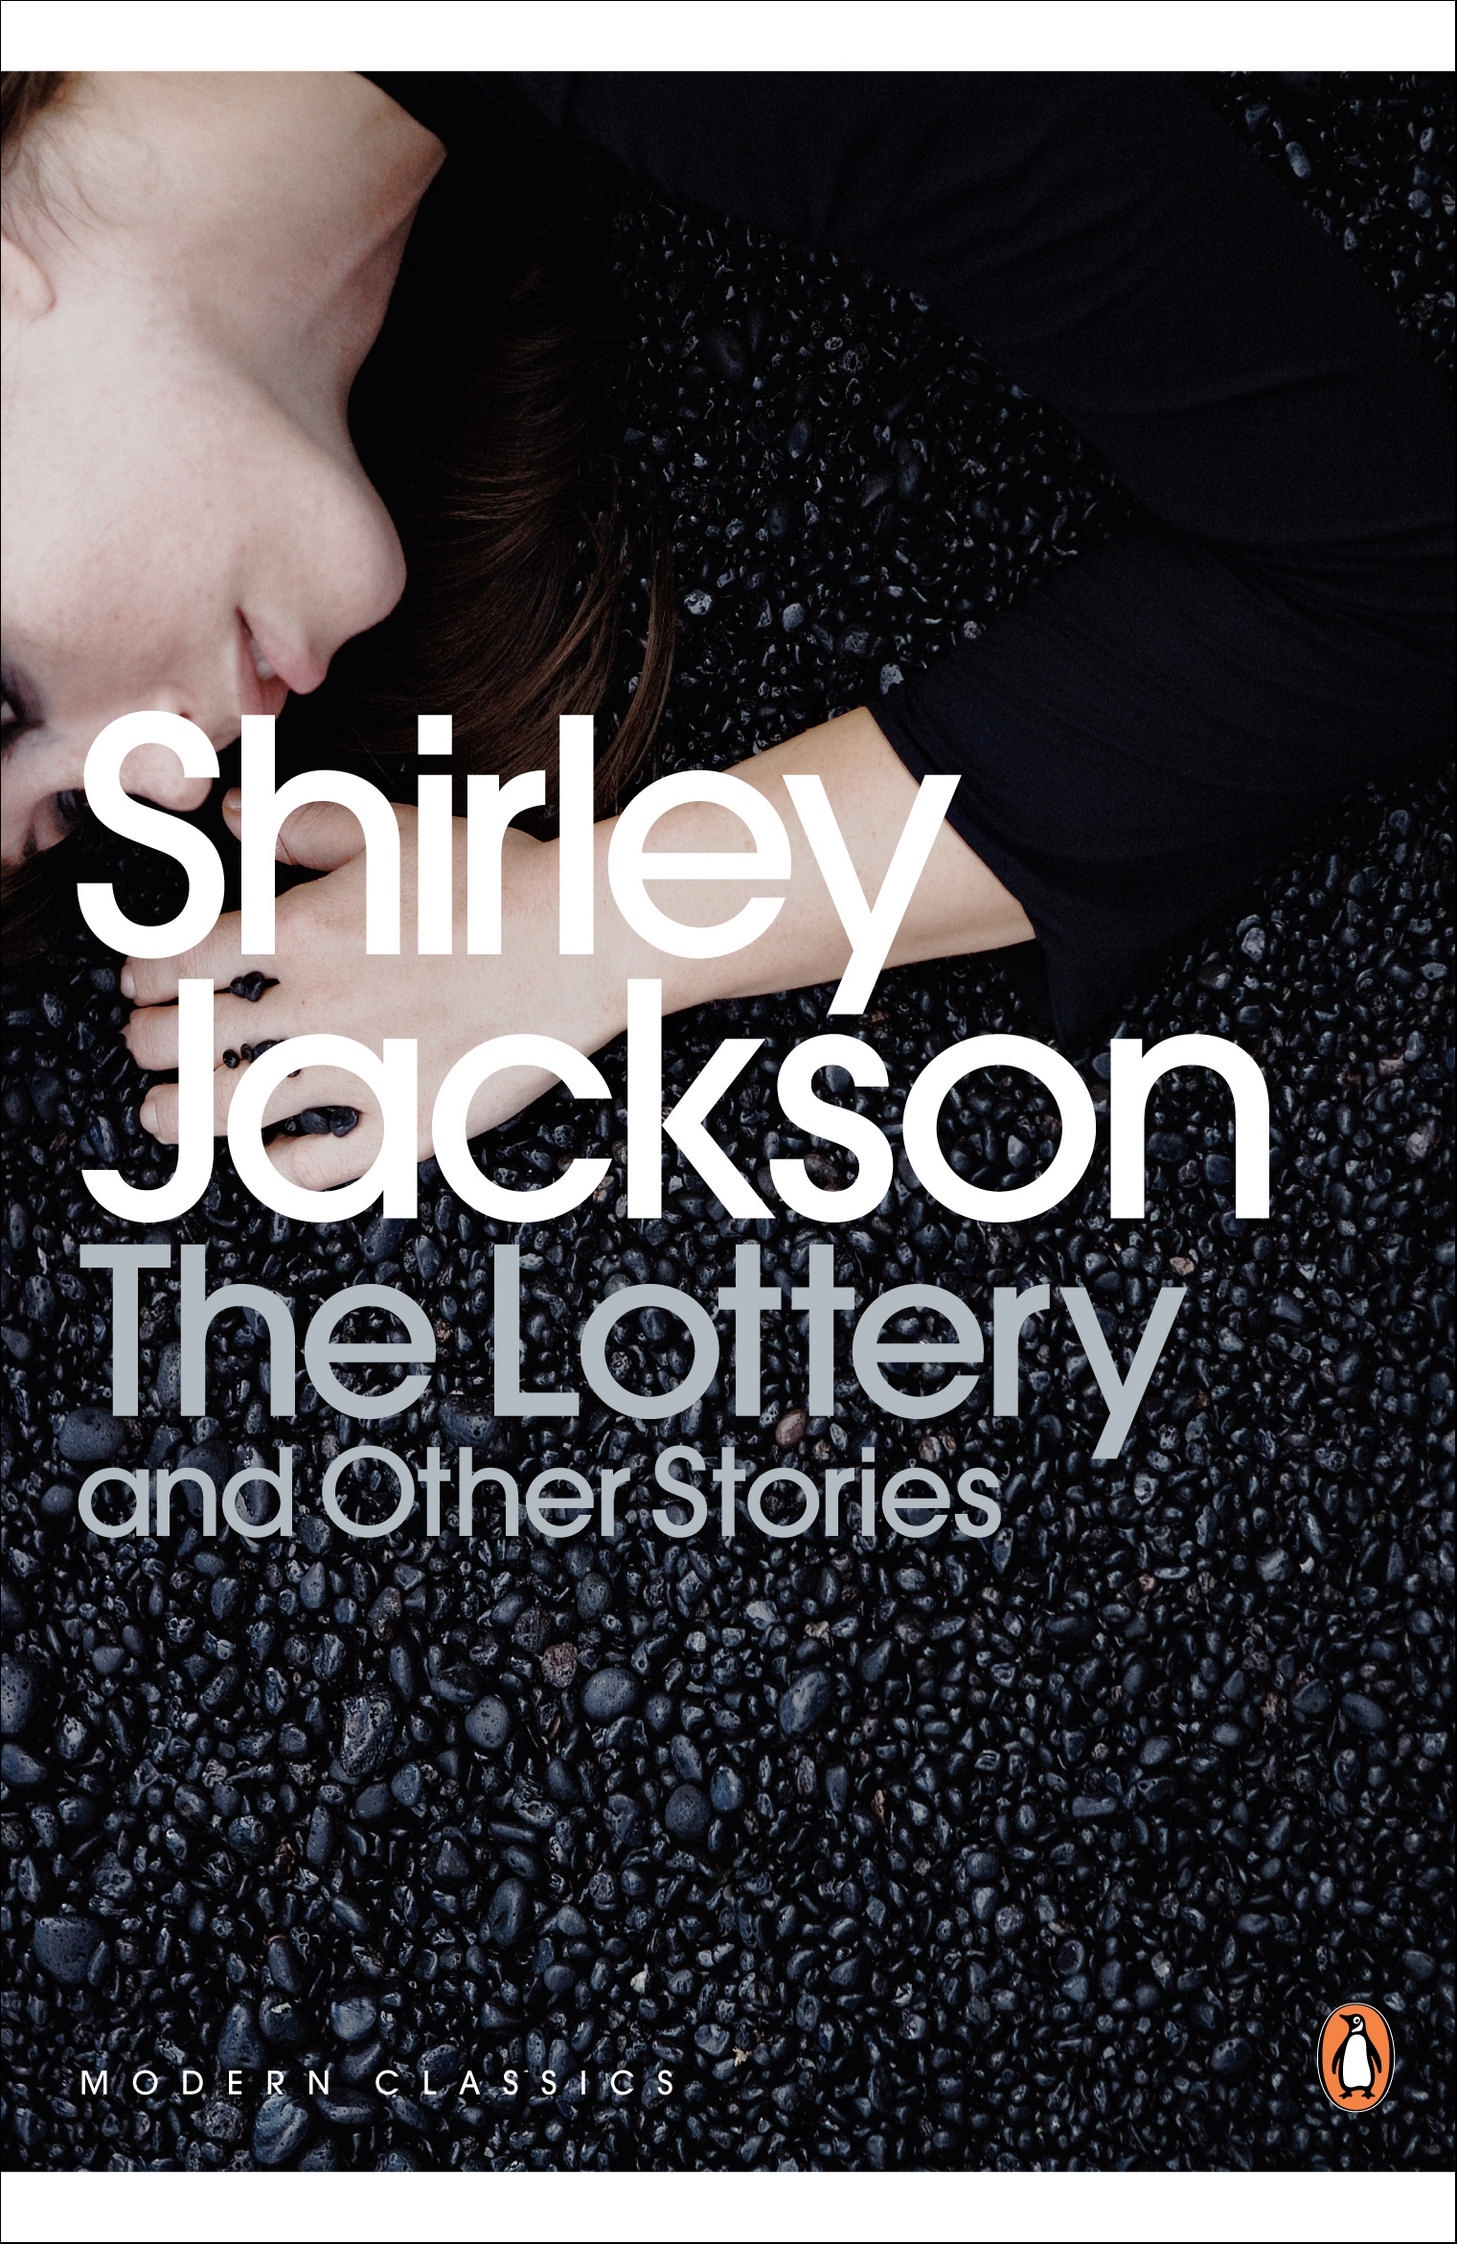 Essay on the lottery by shirley jackson